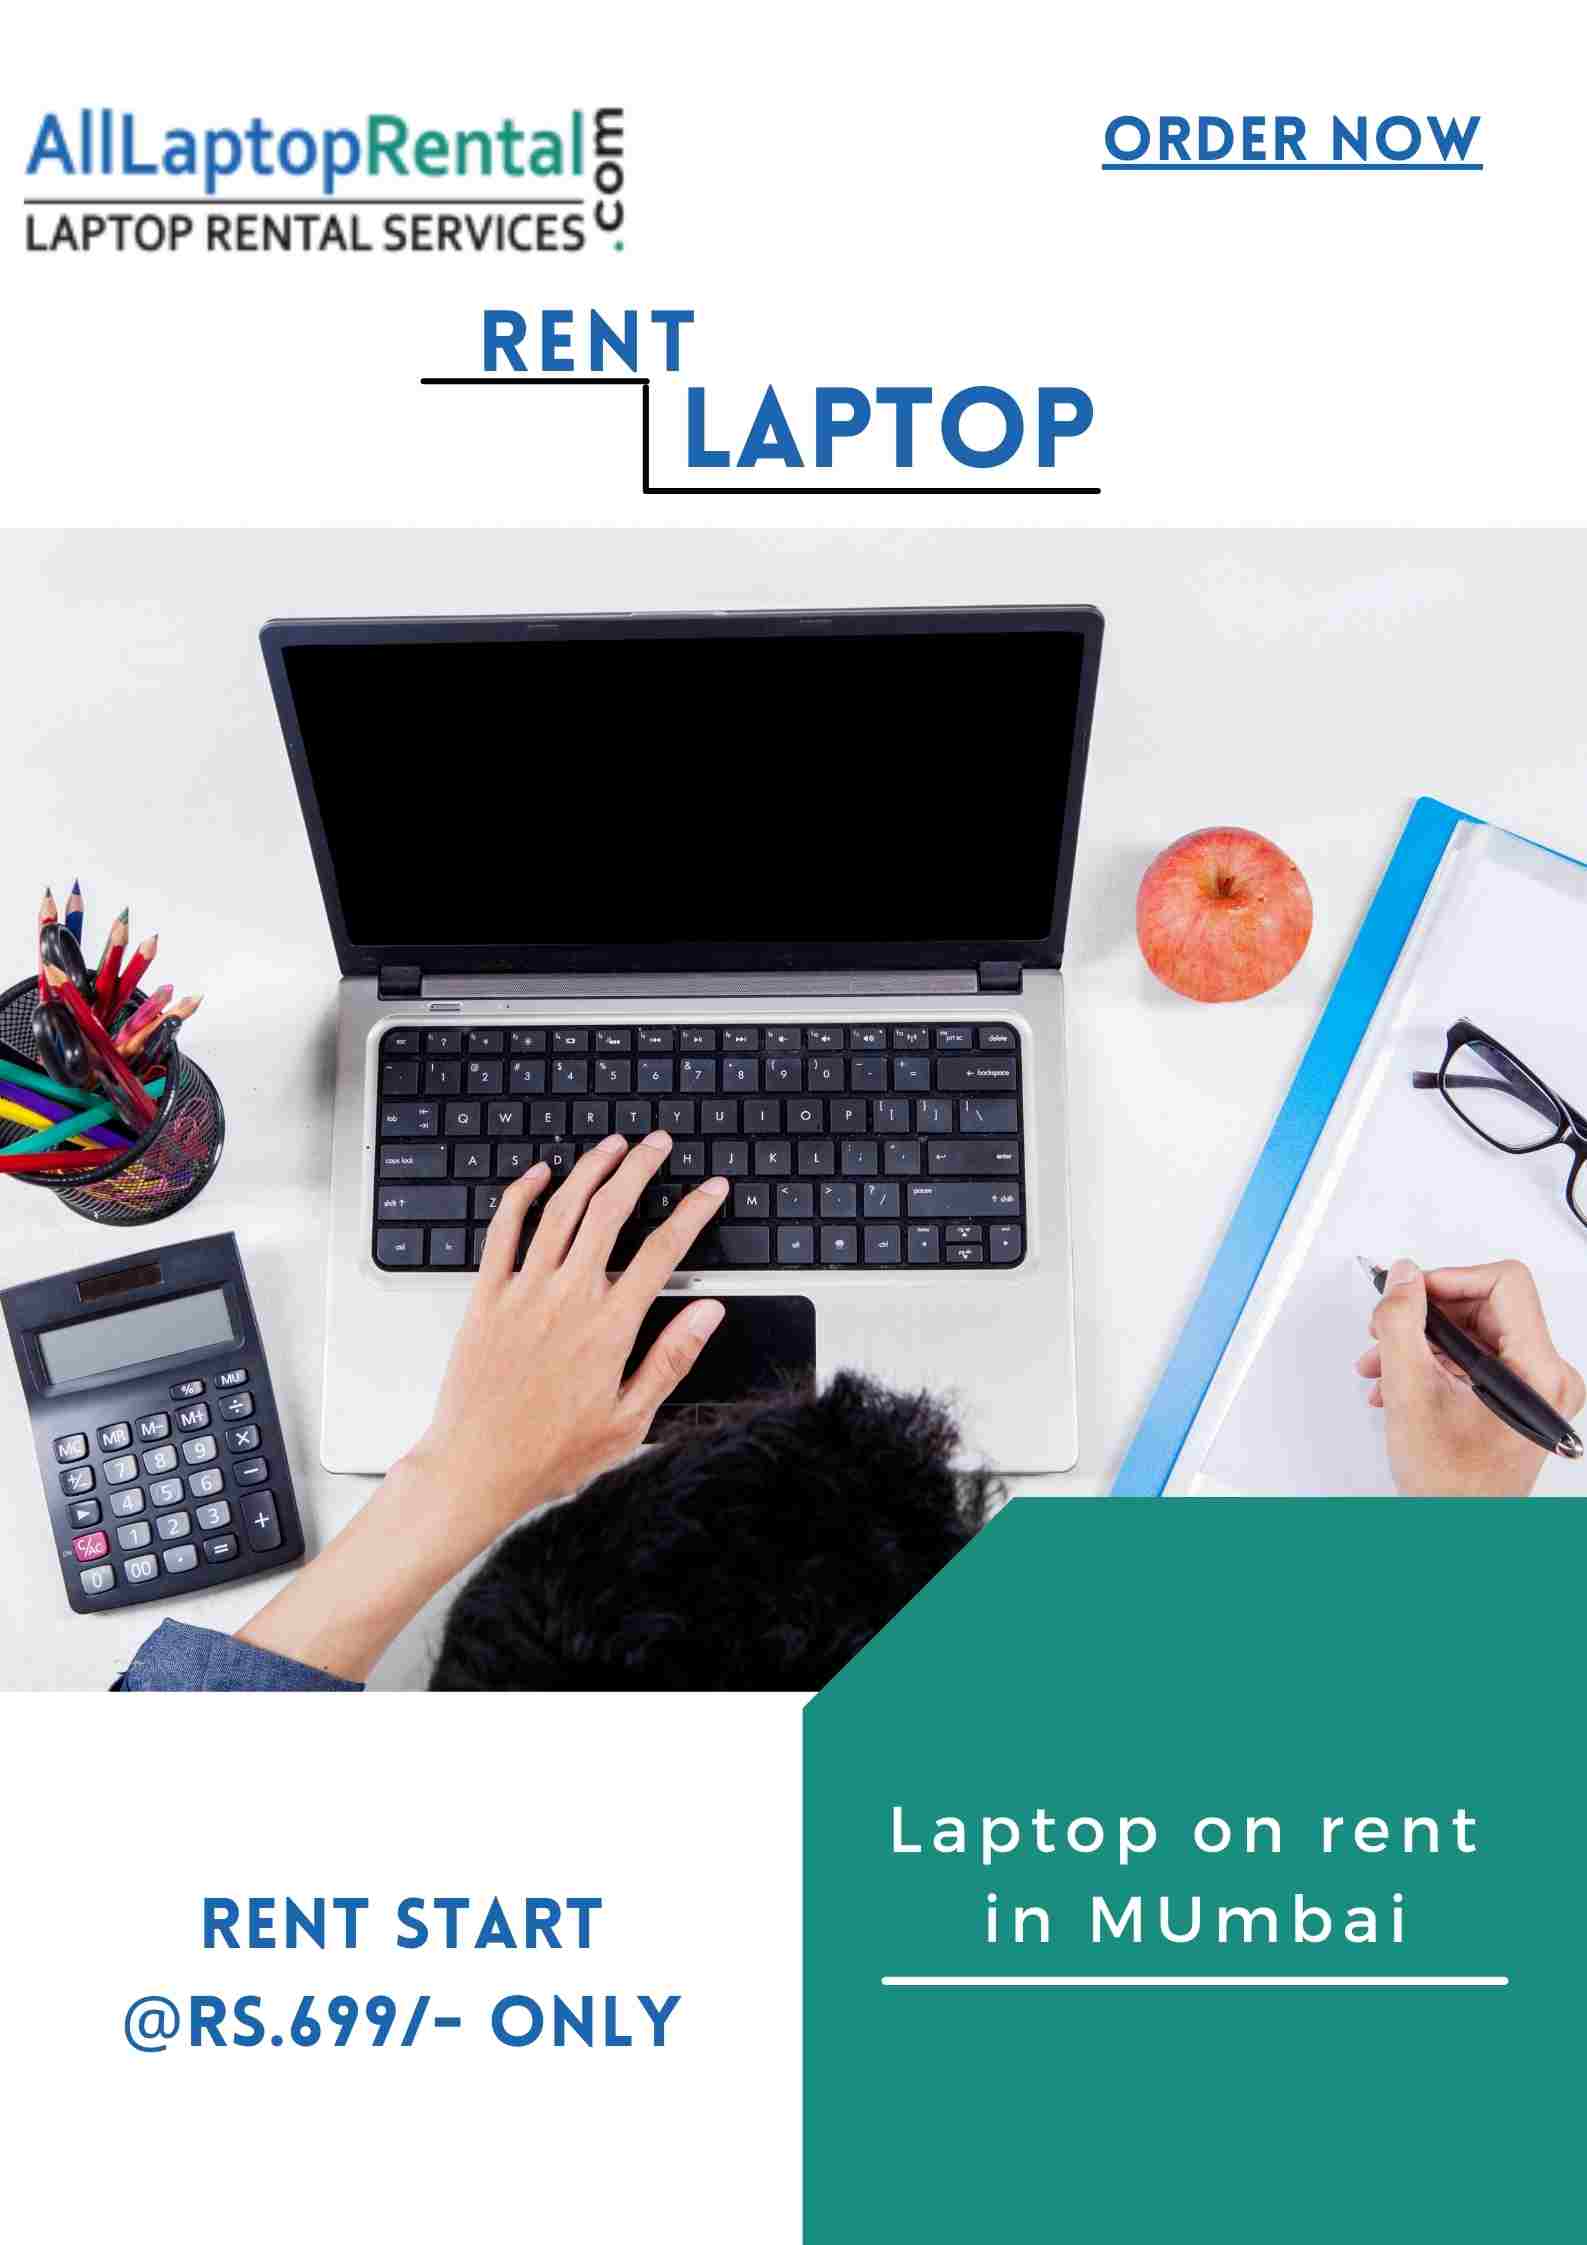 Laptop on rent price start at Rs.699 Mumbai -alllaptoprental.comBuy and SellComputersAll Indiaother